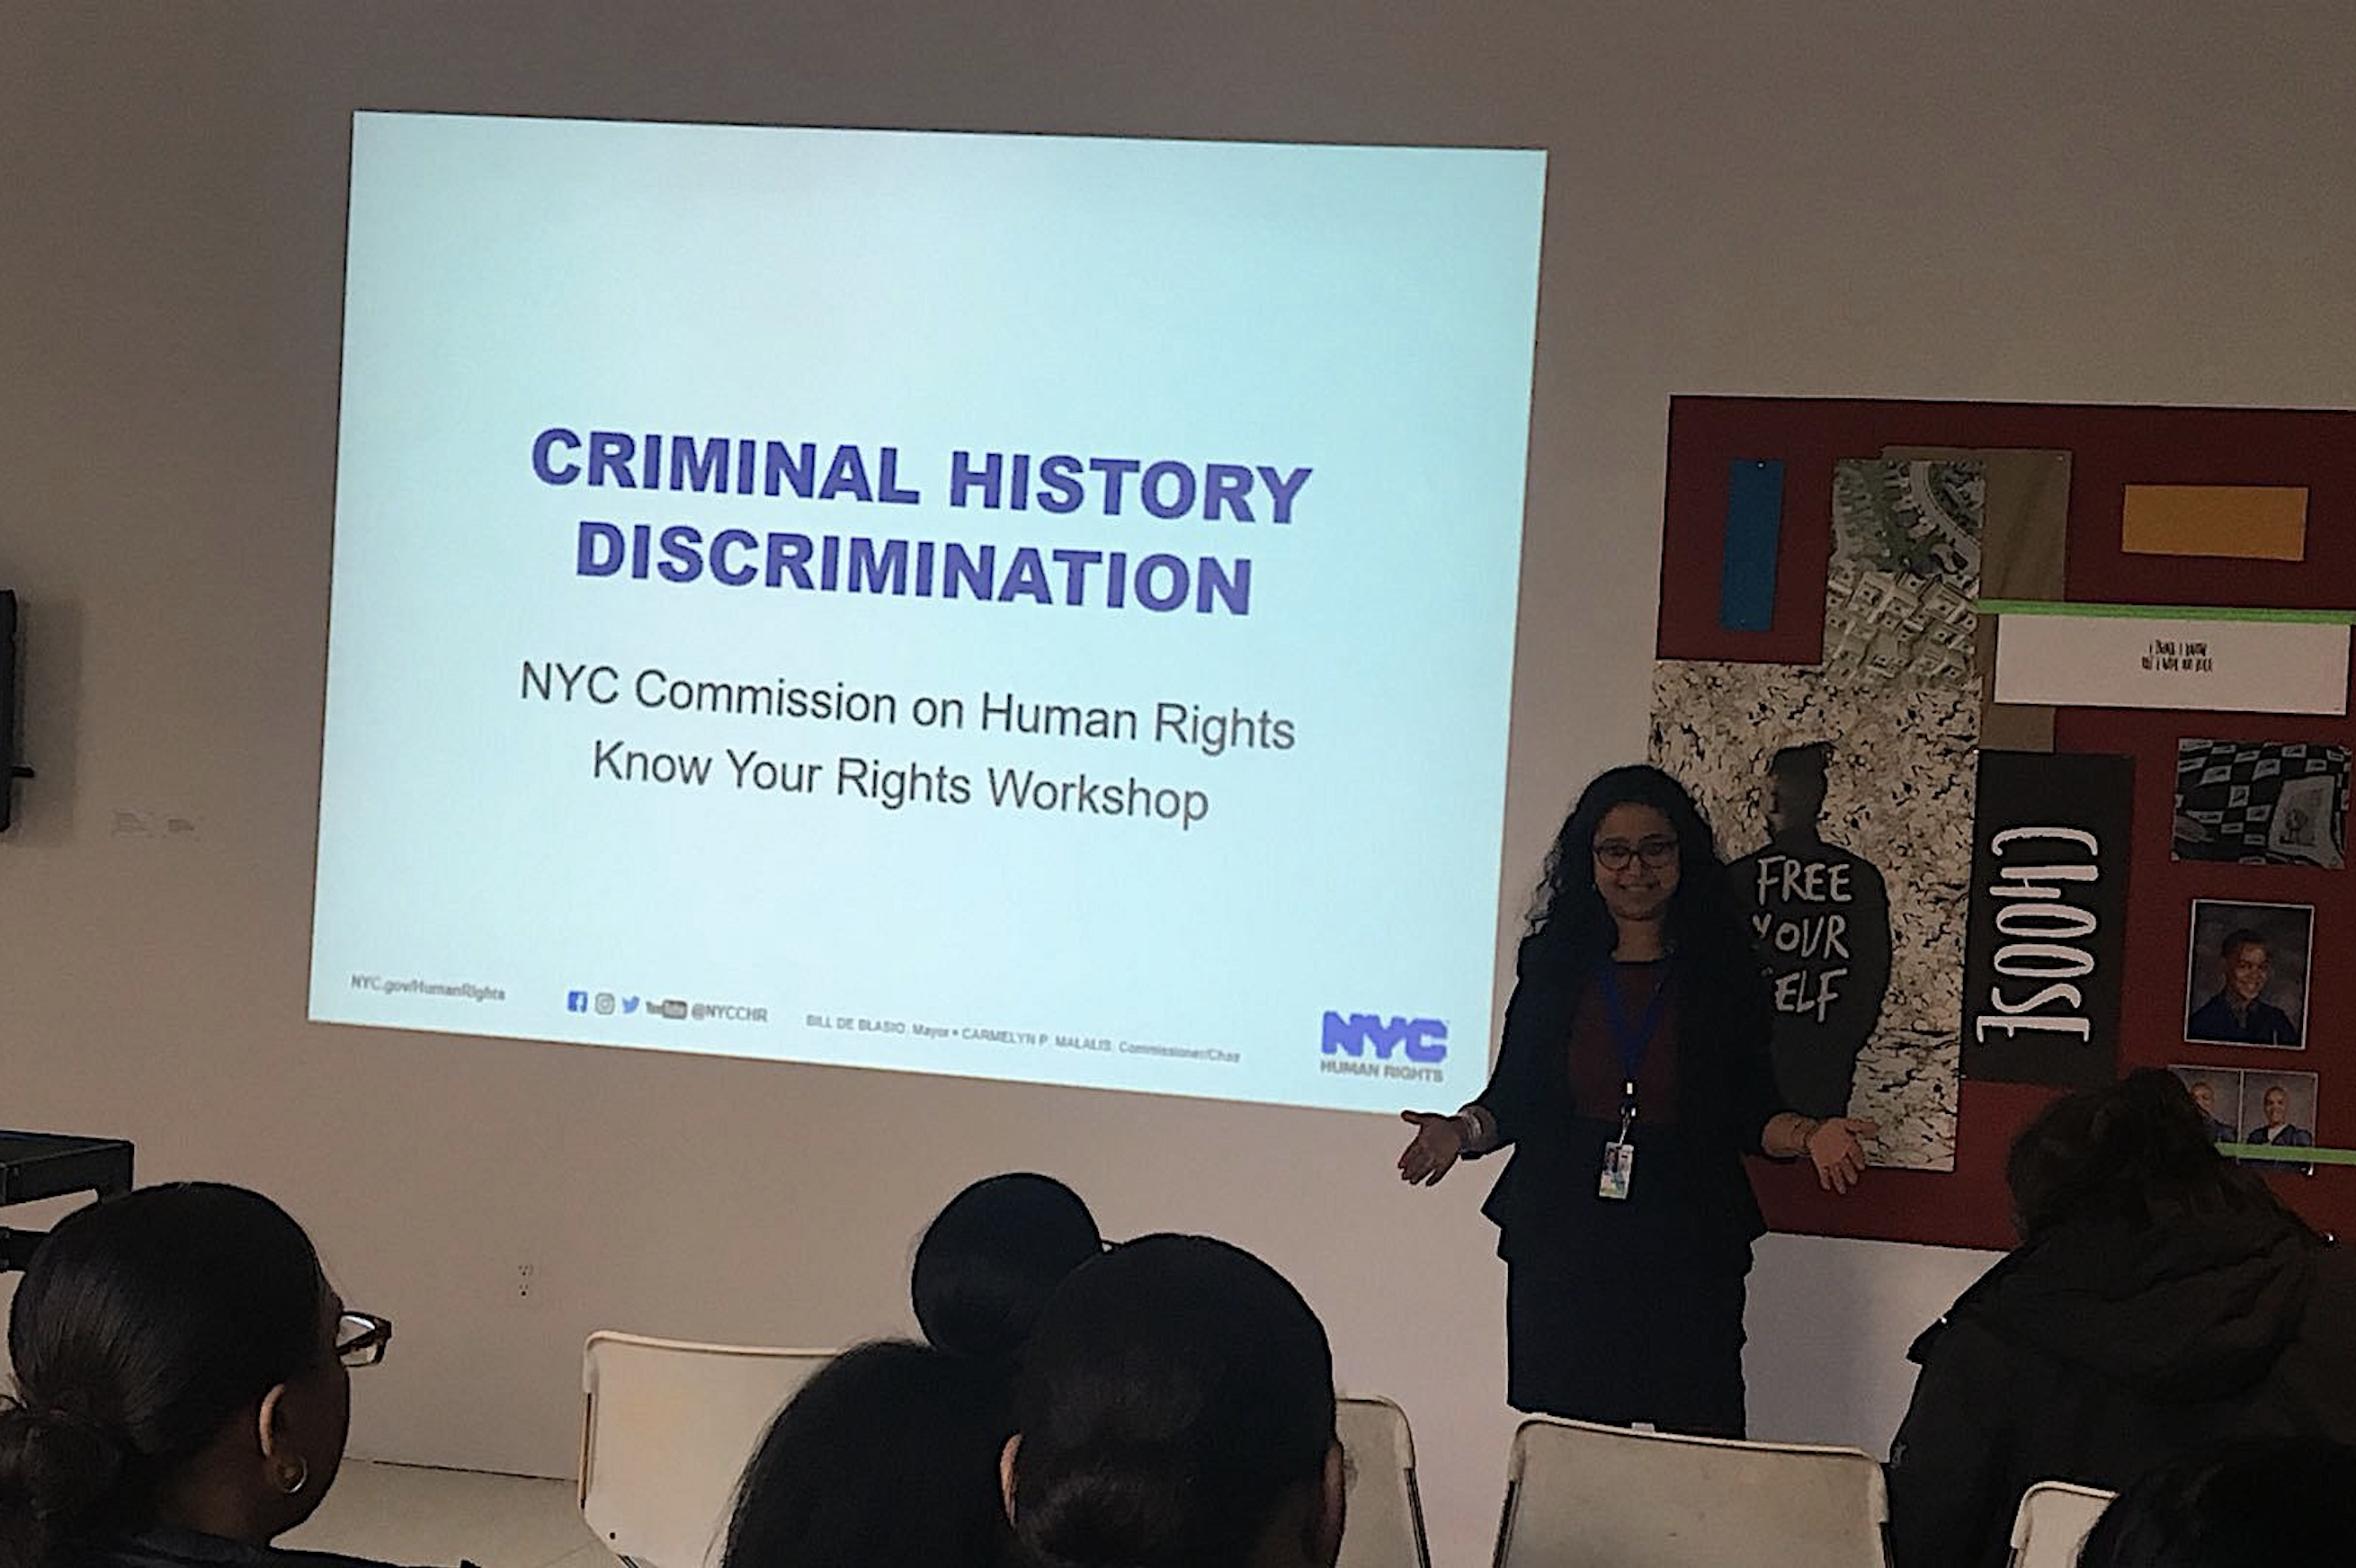 A Commission staff member speaking to a room of people with a presentation projection titled “Criminal History Discrimination : NYC Commission on Human Rights, Know Your Rights Workshop” projected on the wall behind her.